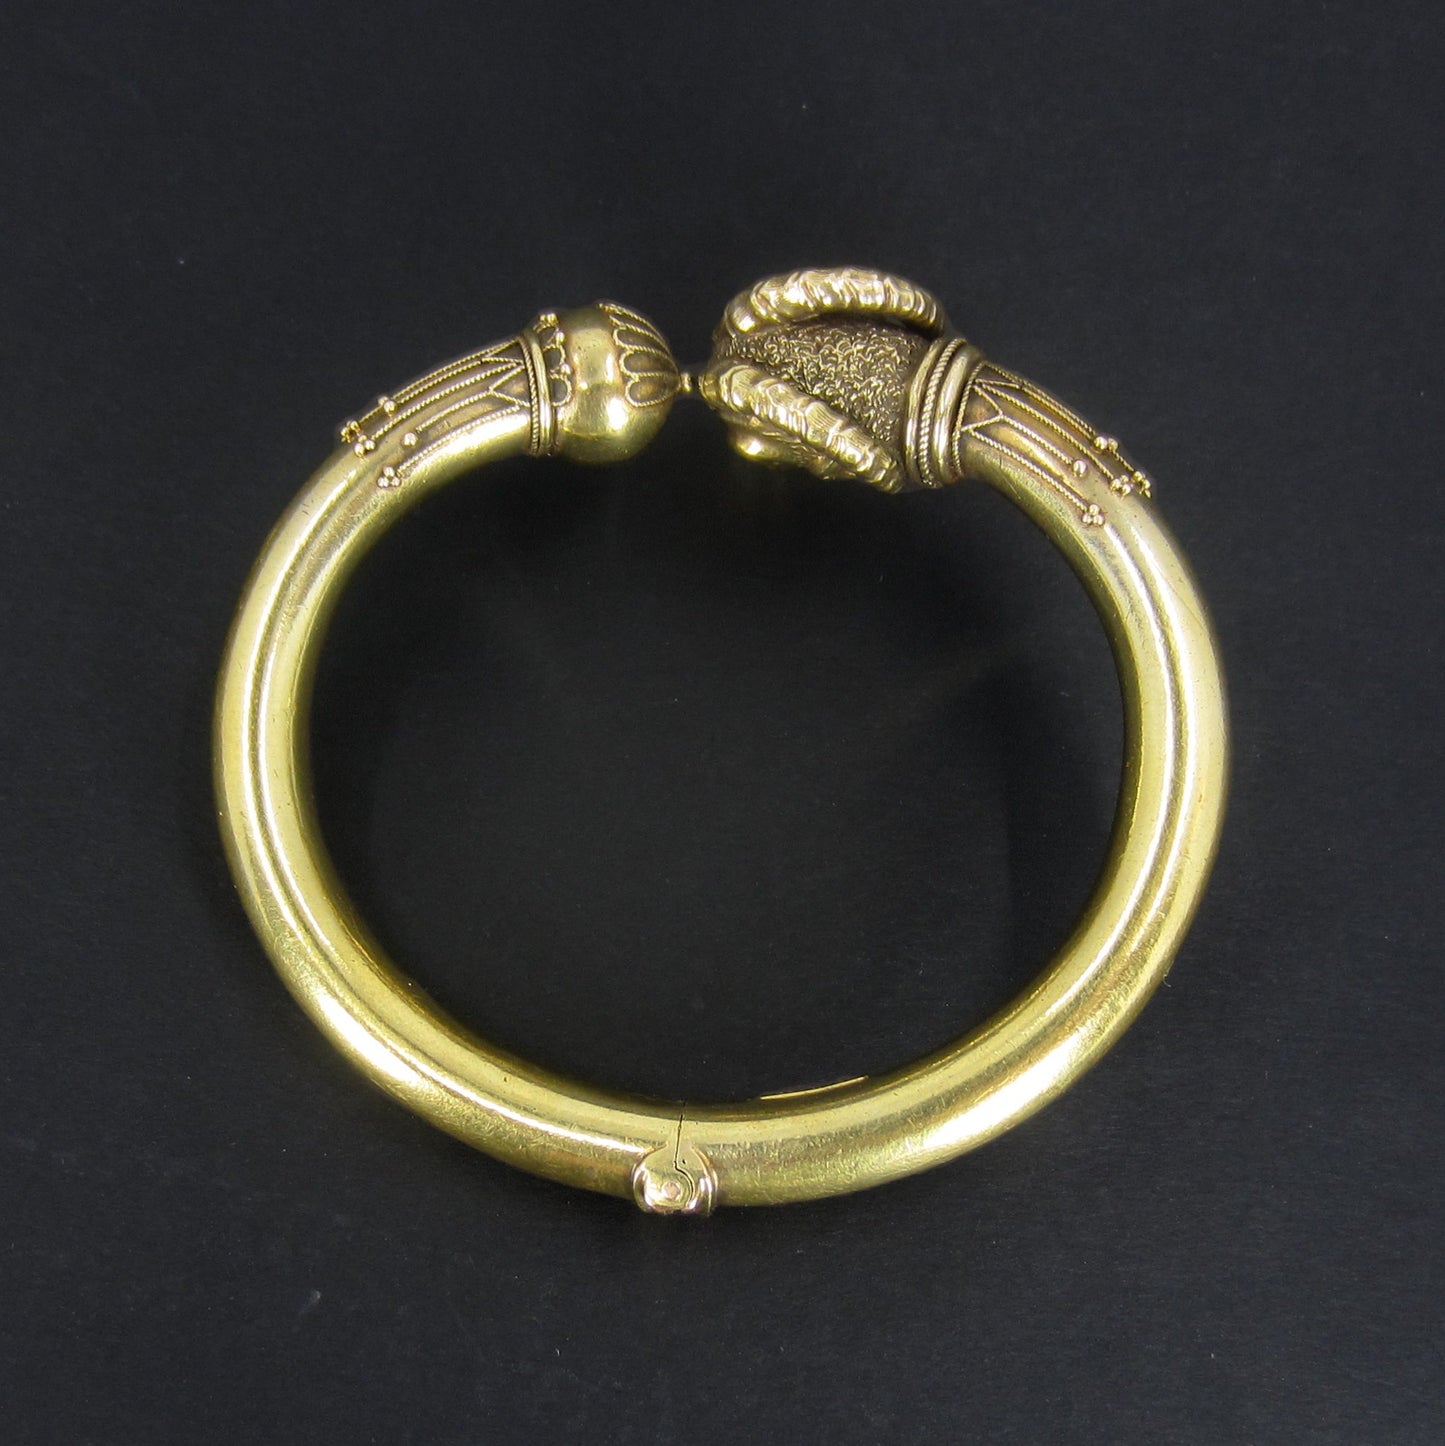 SOLD--Victorian Etruscan Revival Rams Head Hinged Bangle 14k c. 1880